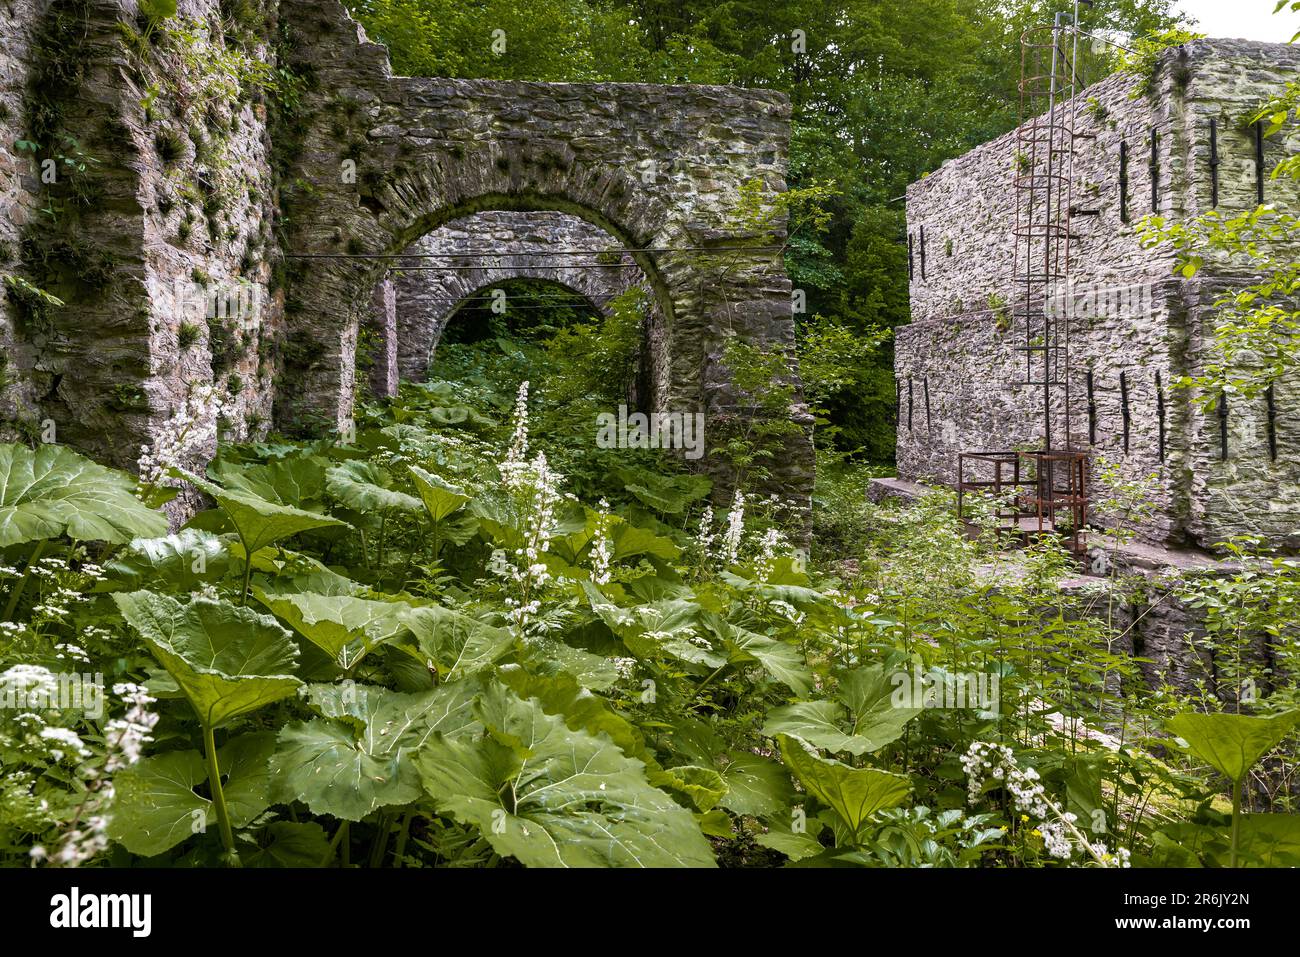 Ancient smelter ruins in Bukk mountains near by the famous Lillafured castle. This place is a part of the Hungarian indrustial heritage. Amazing stone Stock Photo